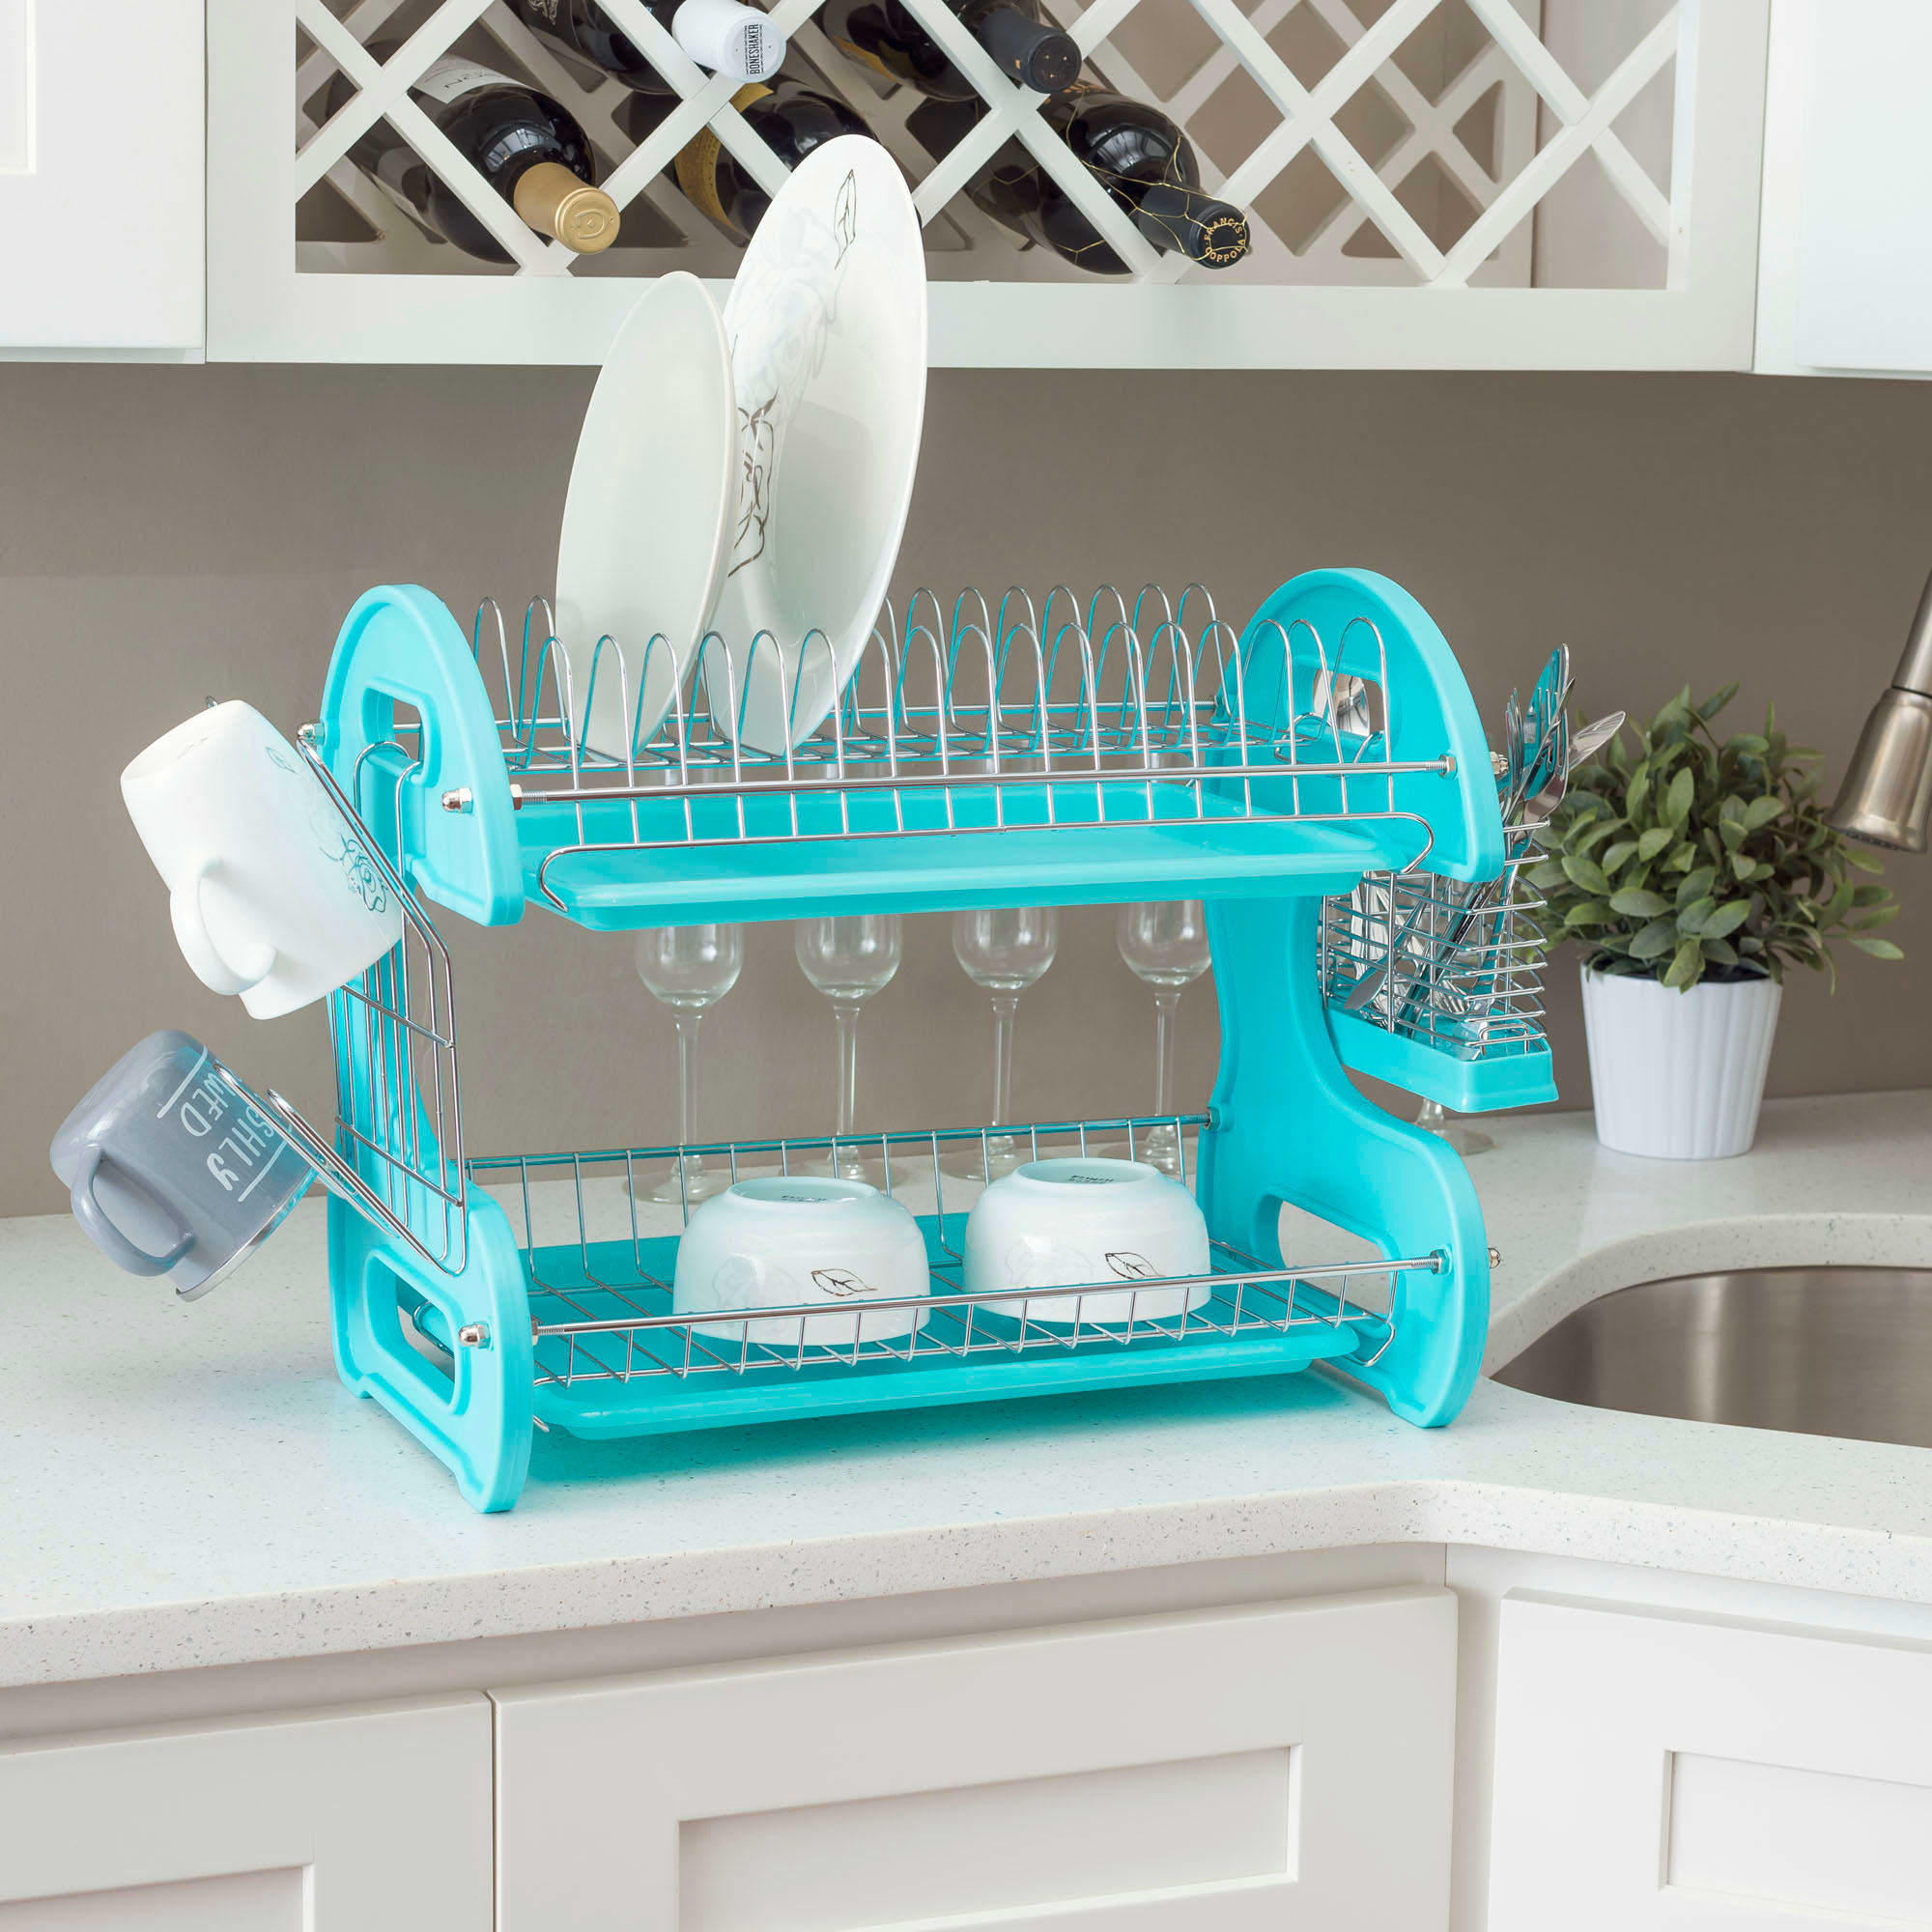 Home Basics 2 Tier Plastic Dish Drainer, Turquoise $20.00 EACH, CASE PACK OF 6